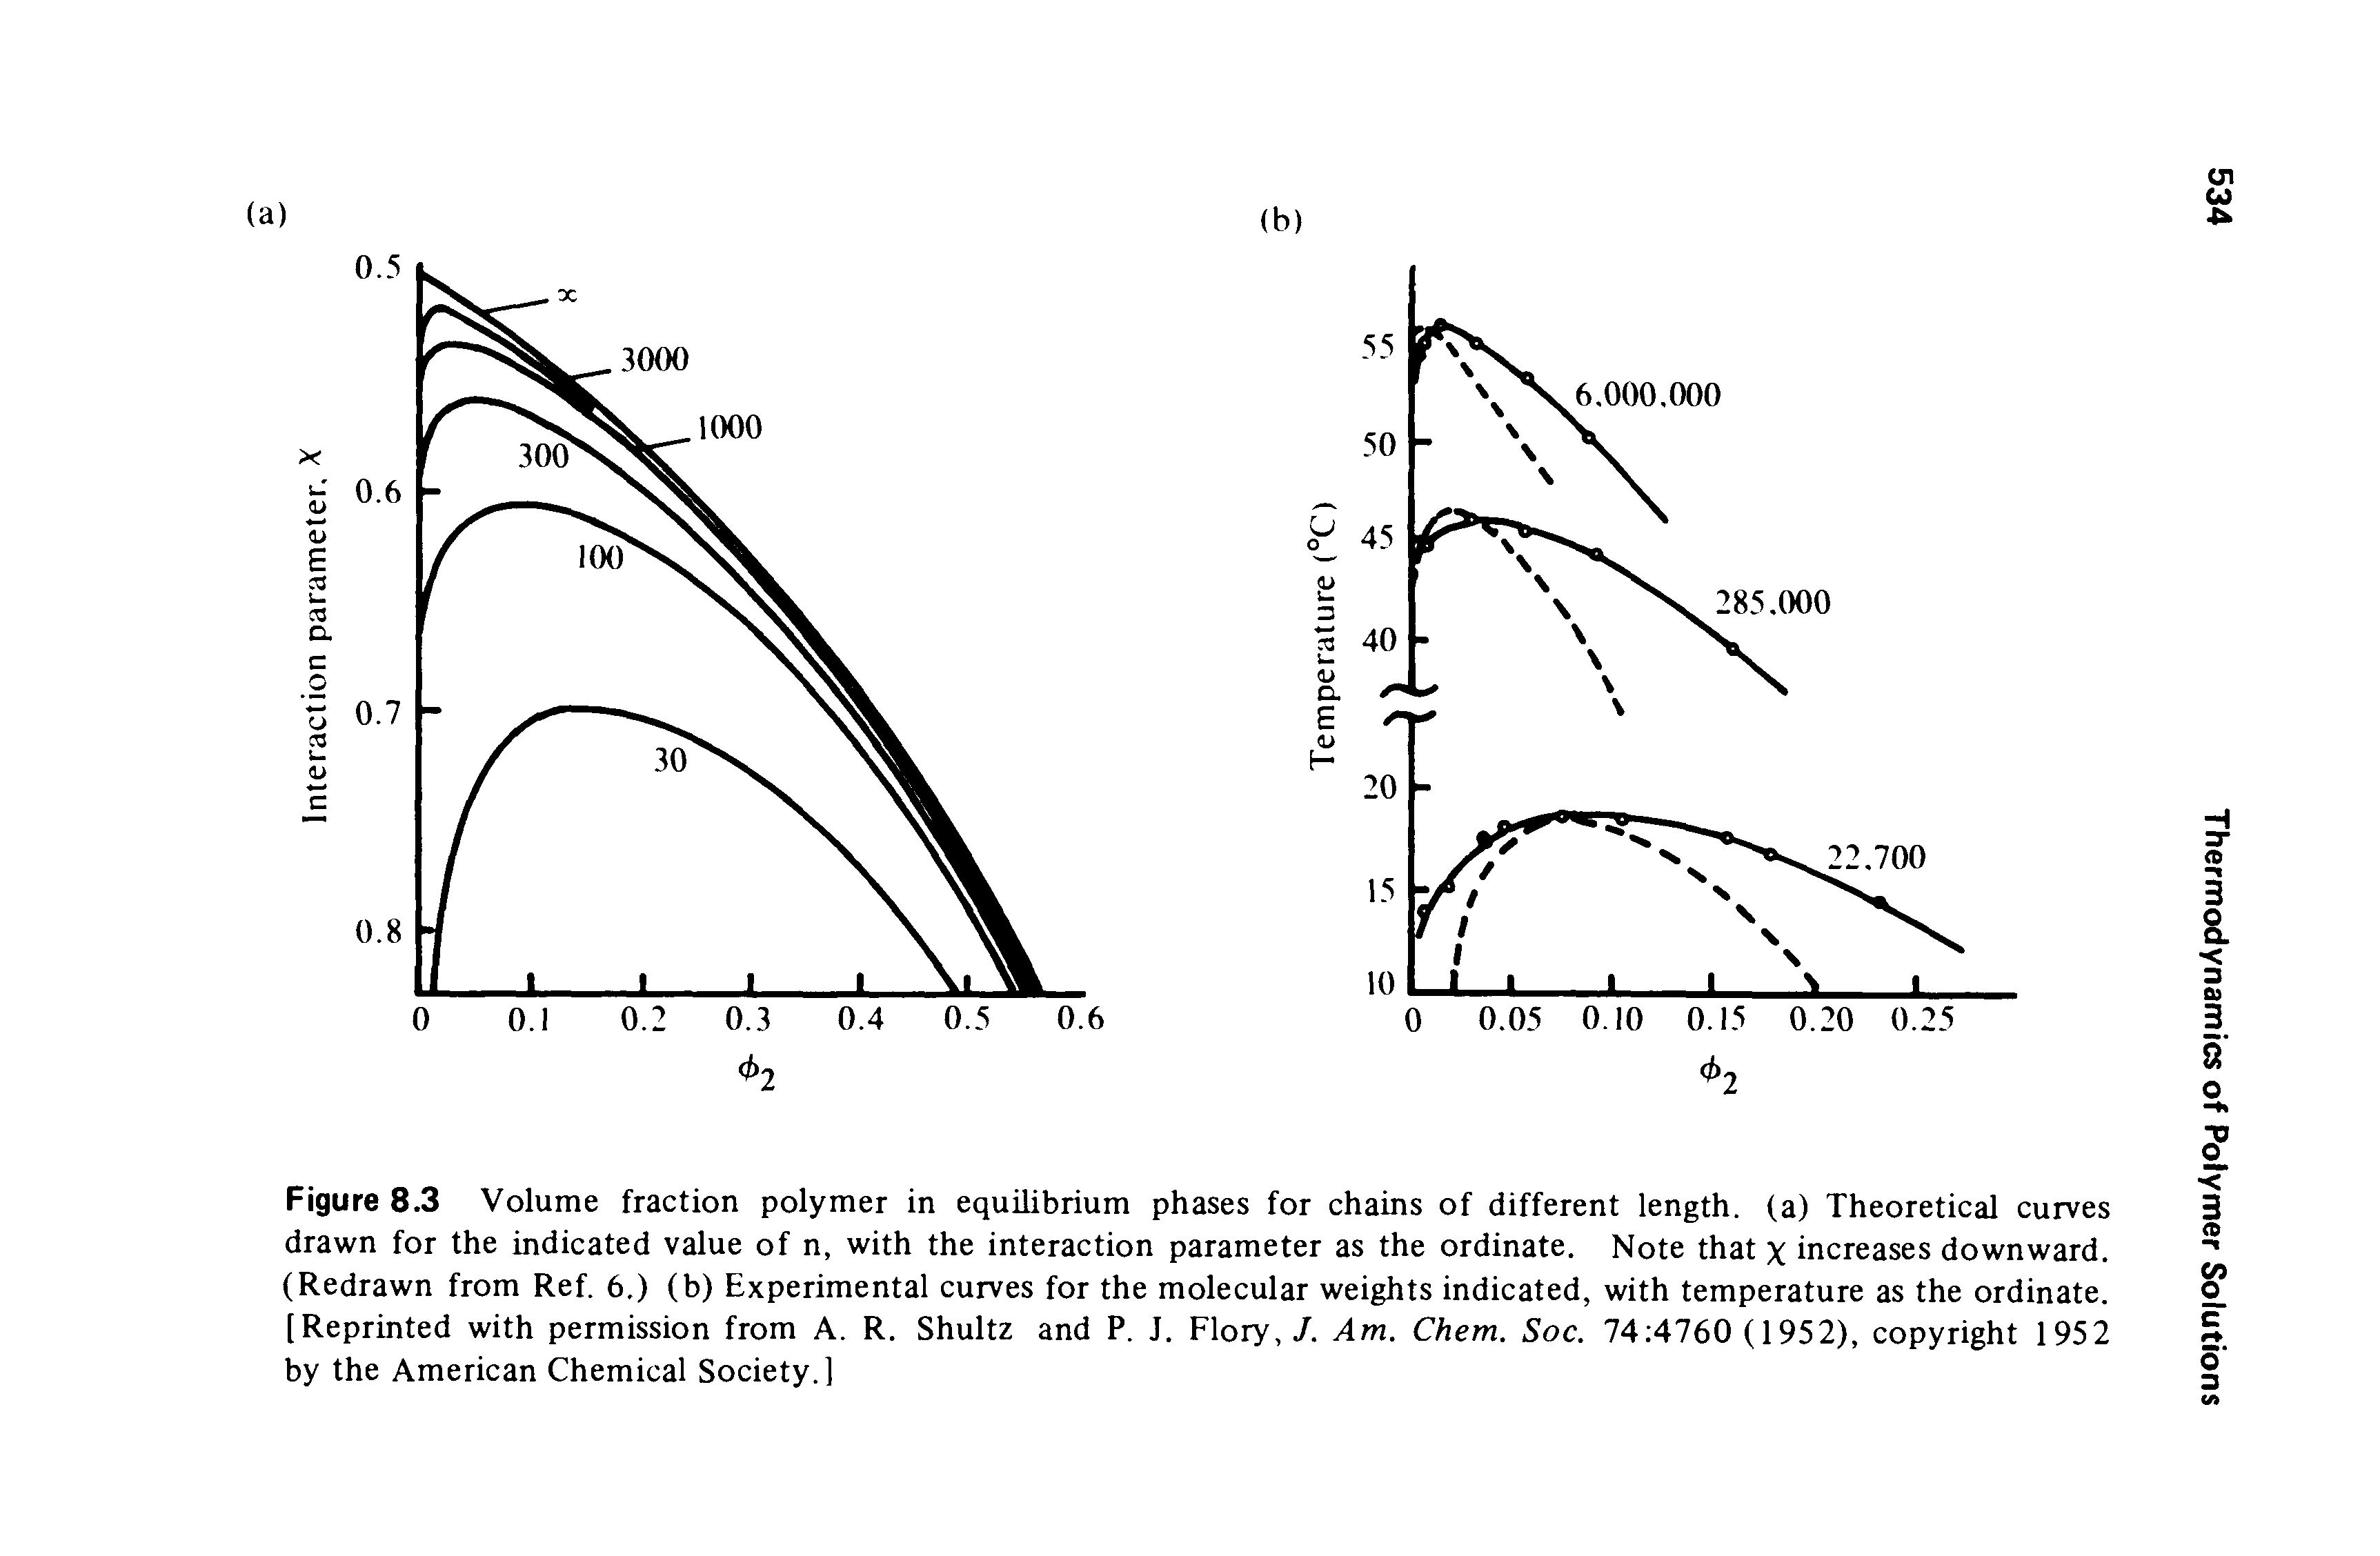 Figure 8.3 Volume fraction polymer in equilibrium phases for chains of different length, (a) Theoretical curves drawn for the indicated value of n, with the interaction parameter as the ordinate. Note that x increases downward. (Redrawn from Ref. 6.) (b) Experimental curves for the molecular weights indicated, with temperature as the ordinate. [Reprinted with permission from A. R. Shultz and P. J. Flory, J. Am. Chem. Soc. 74 4760 (1952), copyright 1952 by the American Chemical Society.]...